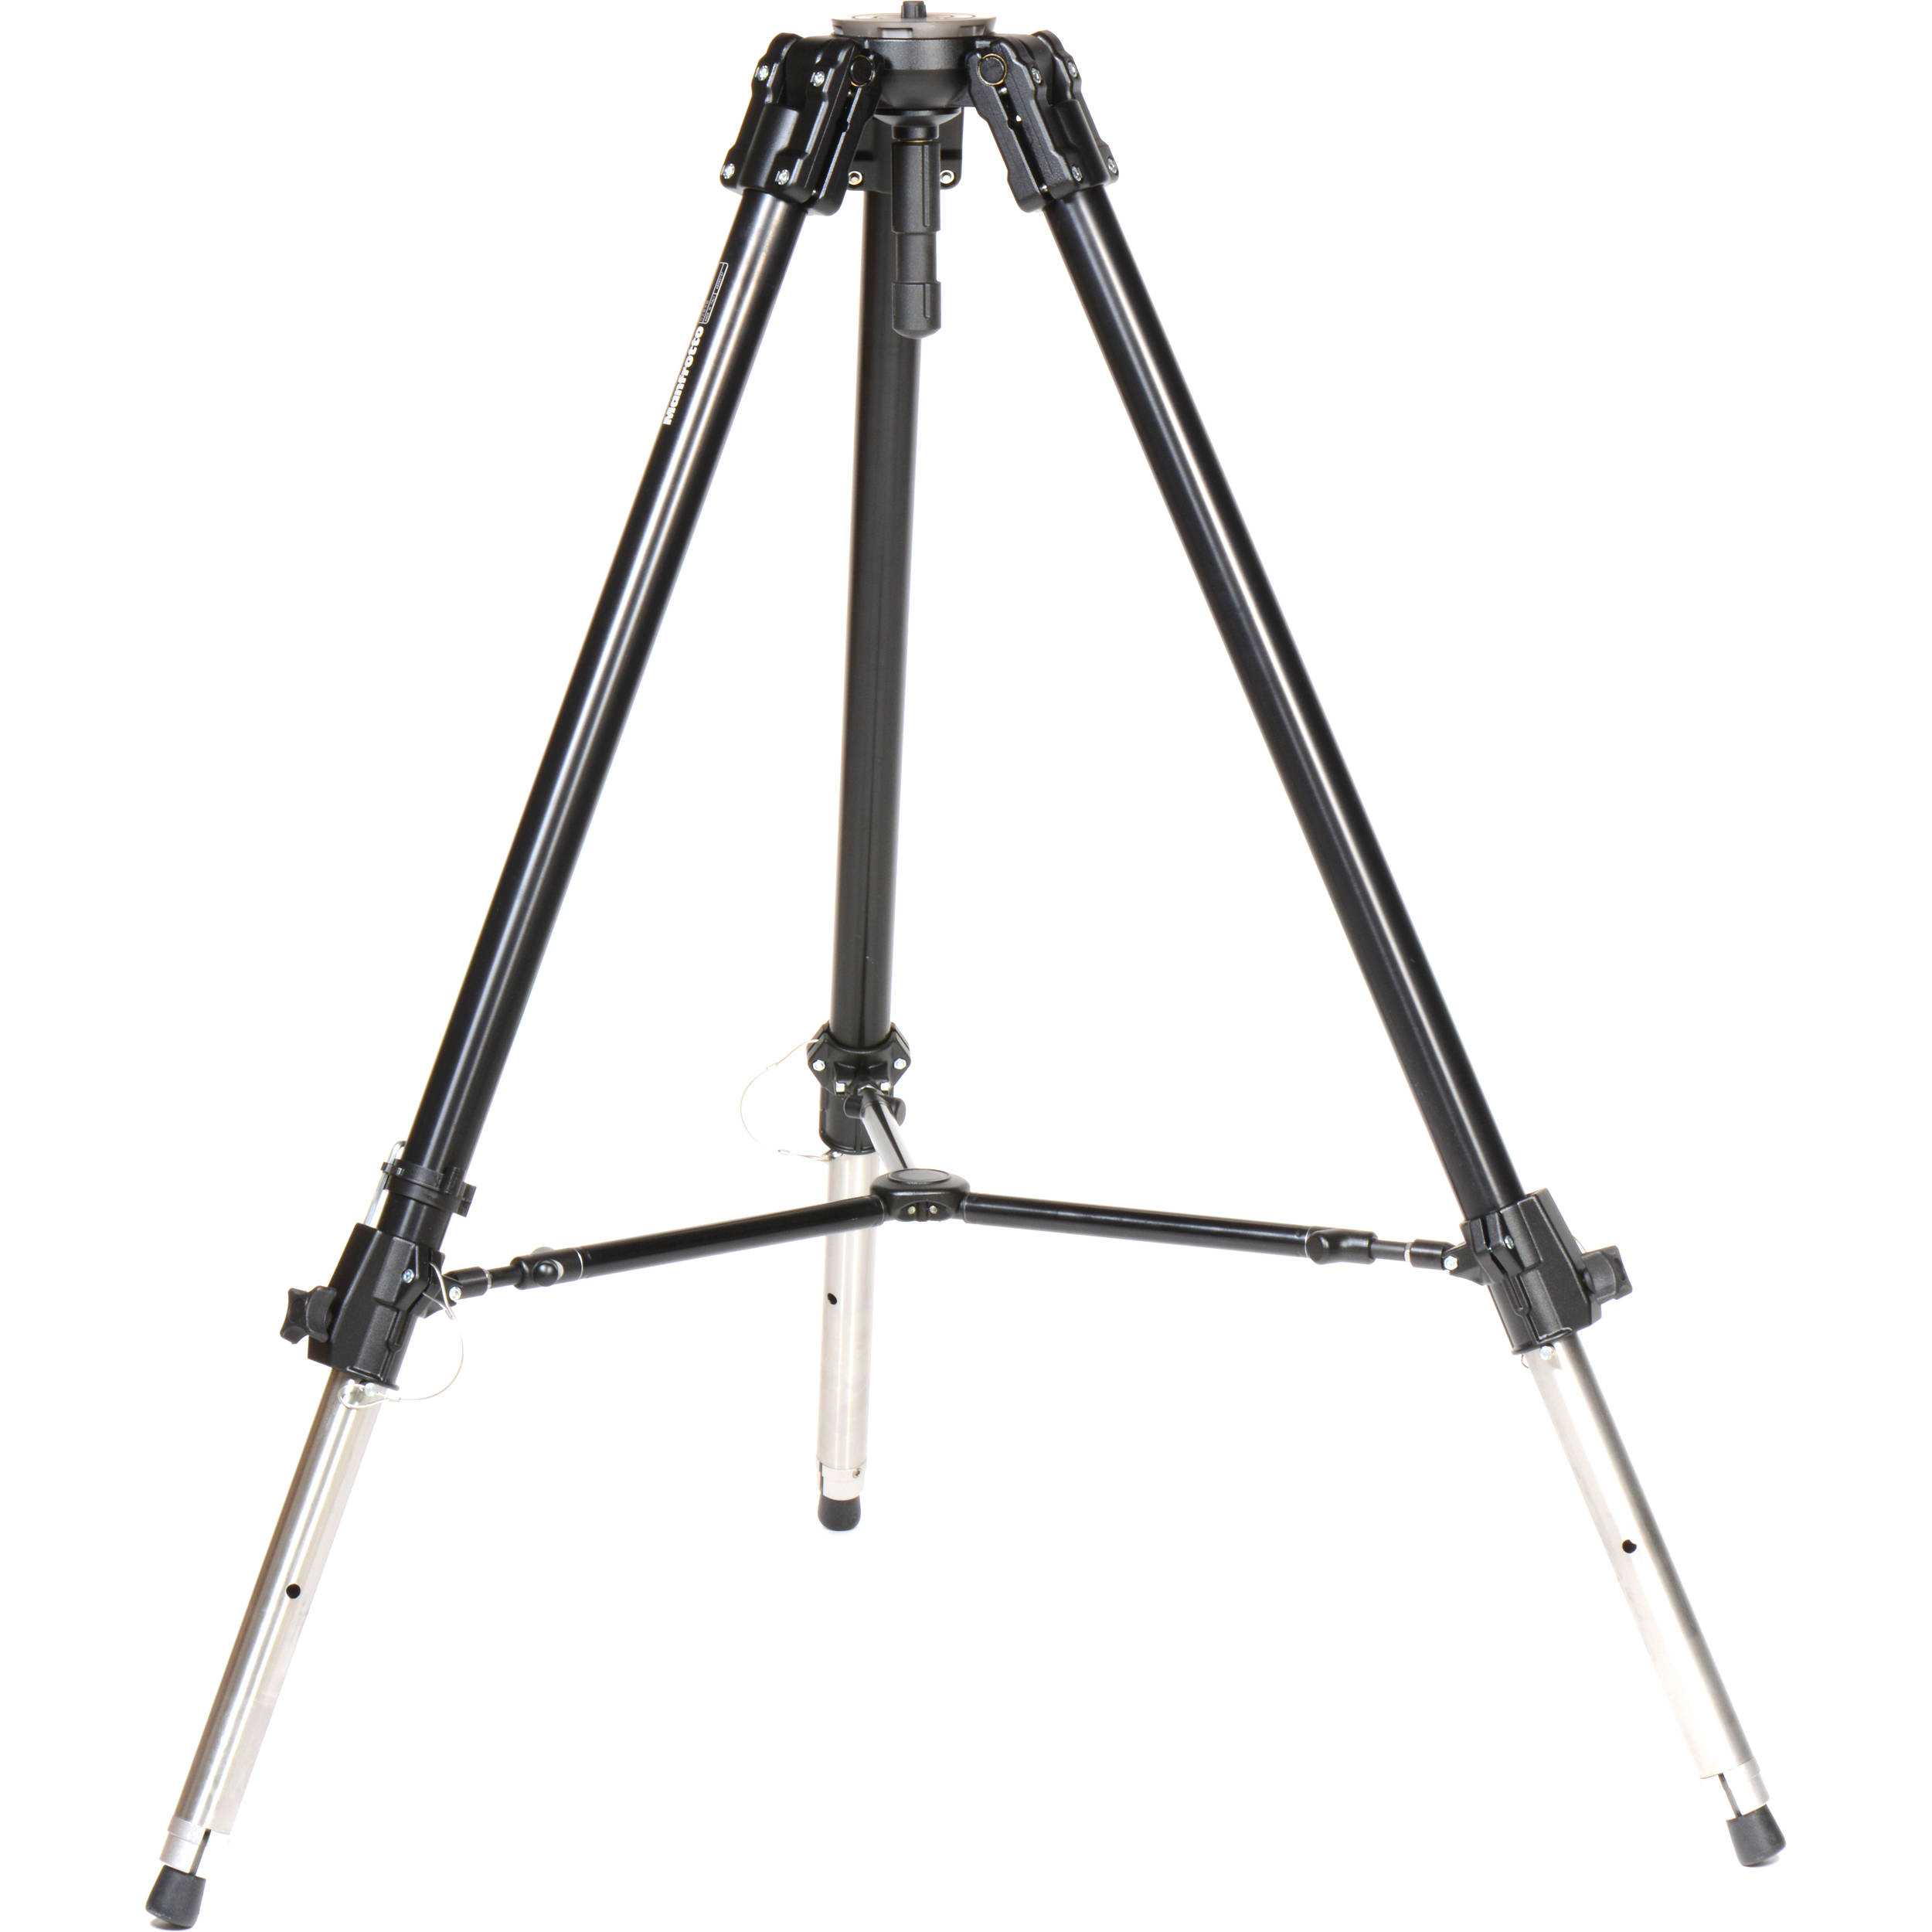 Delaunay Productions - Équipements - MANFROTTO 528XB - image_2